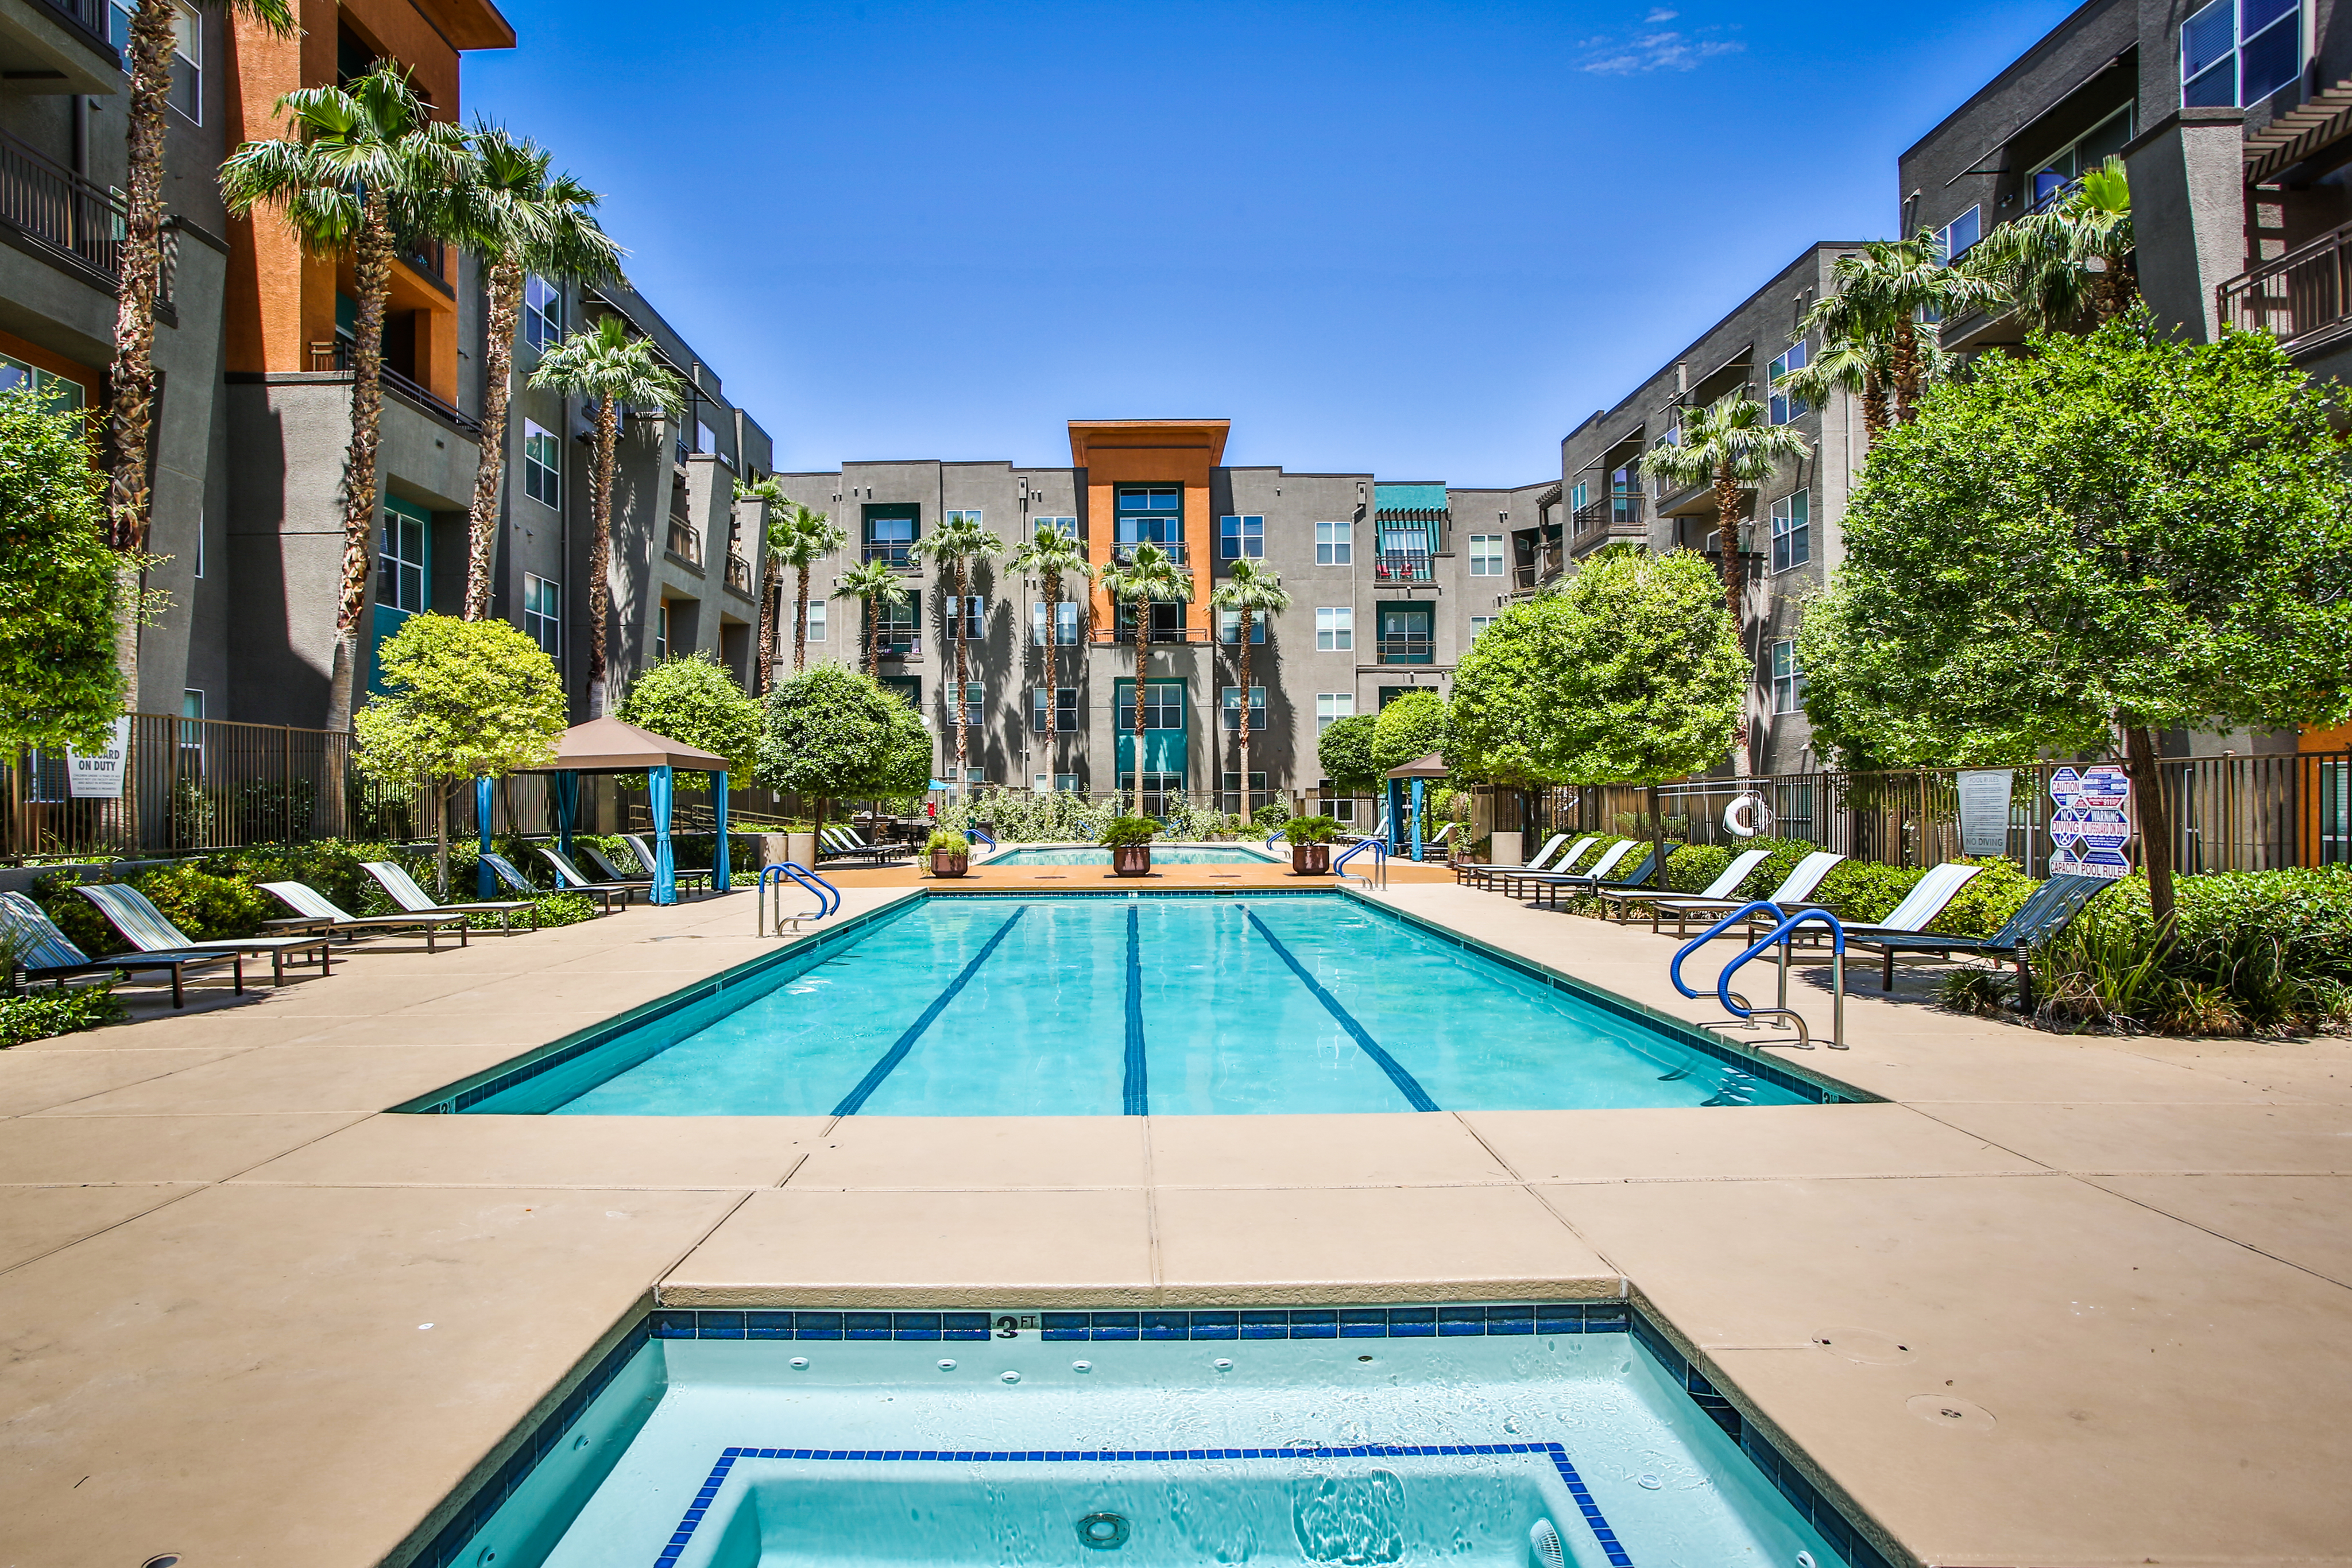 Security Properties Acquires Lofts at 7100 Apartment Community in Las Vegas, Nevada for $80 Million-image